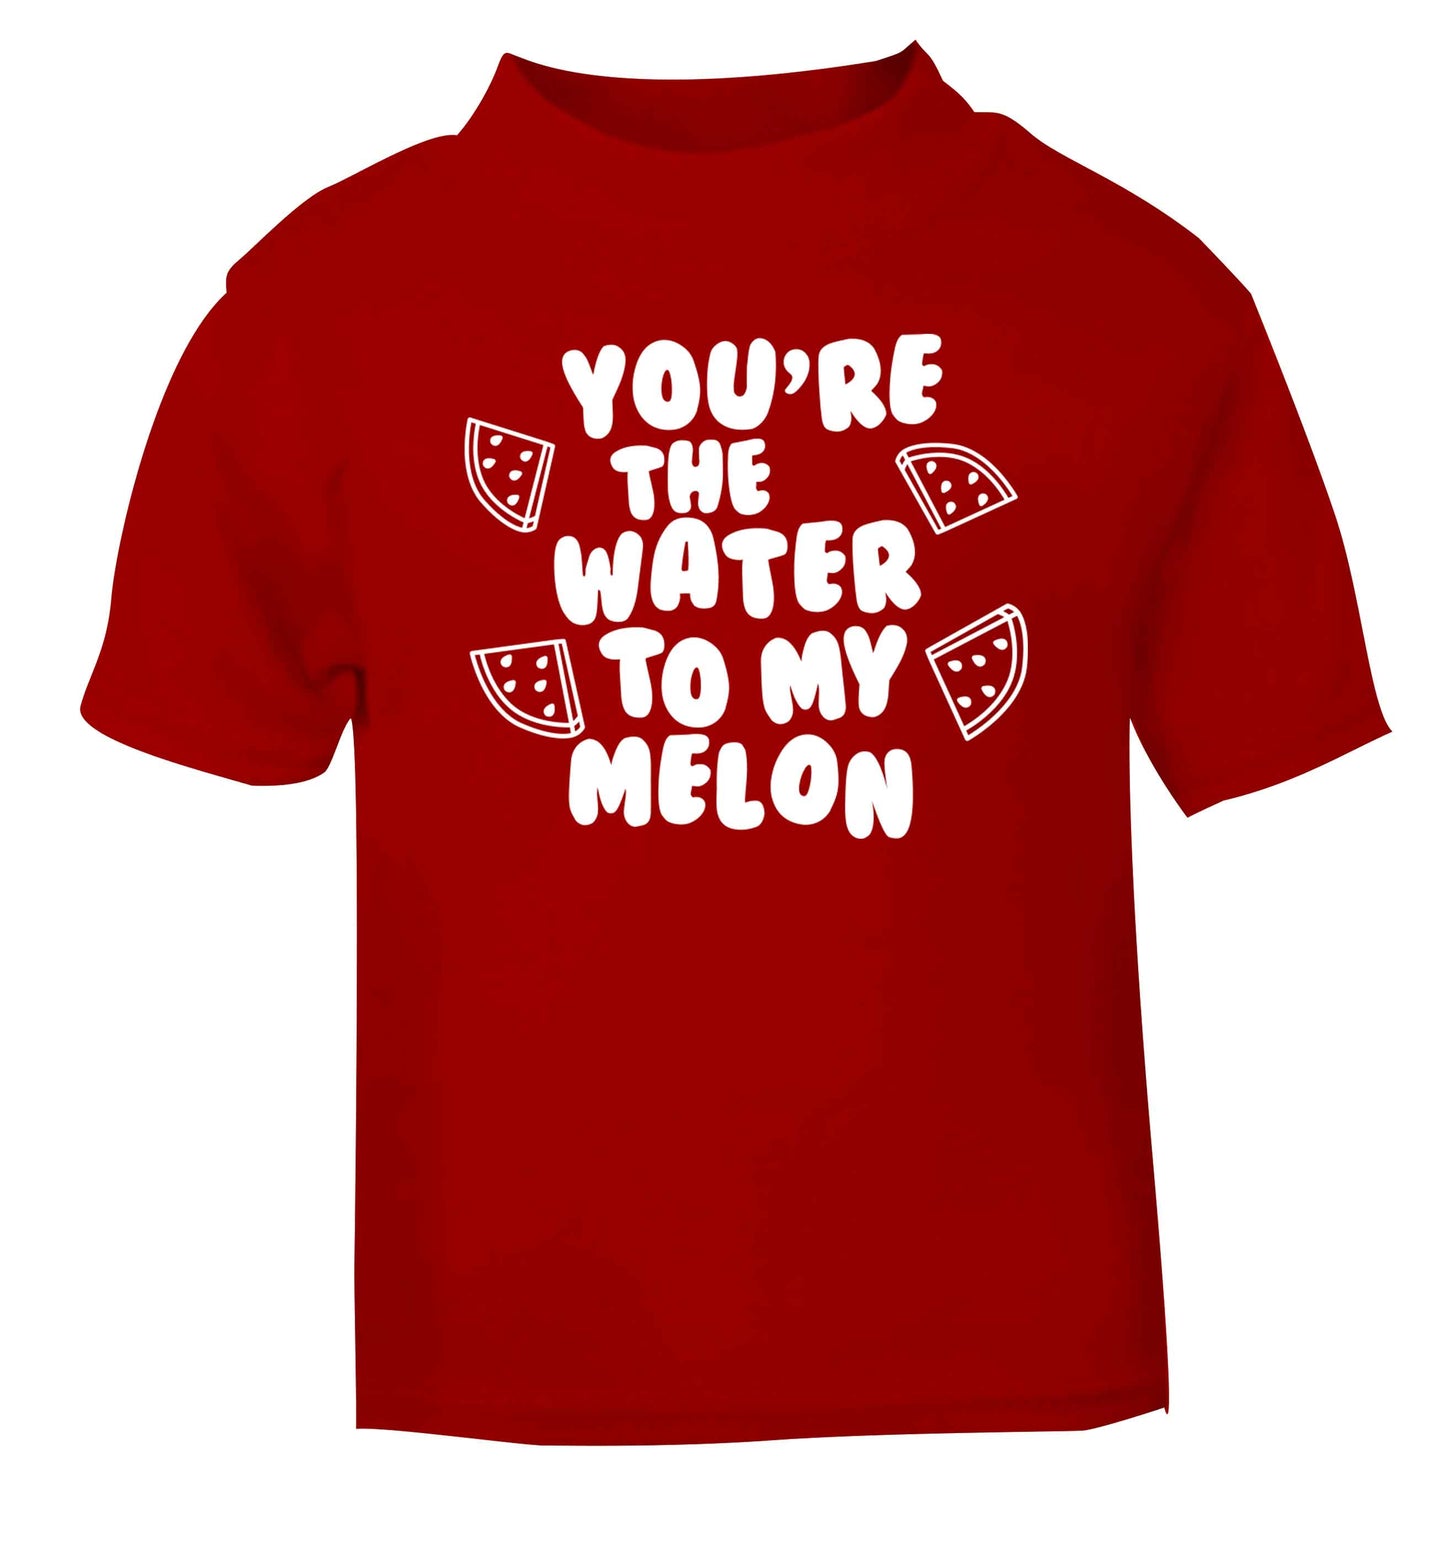 You're the water to my melon red baby toddler Tshirt 2 Years